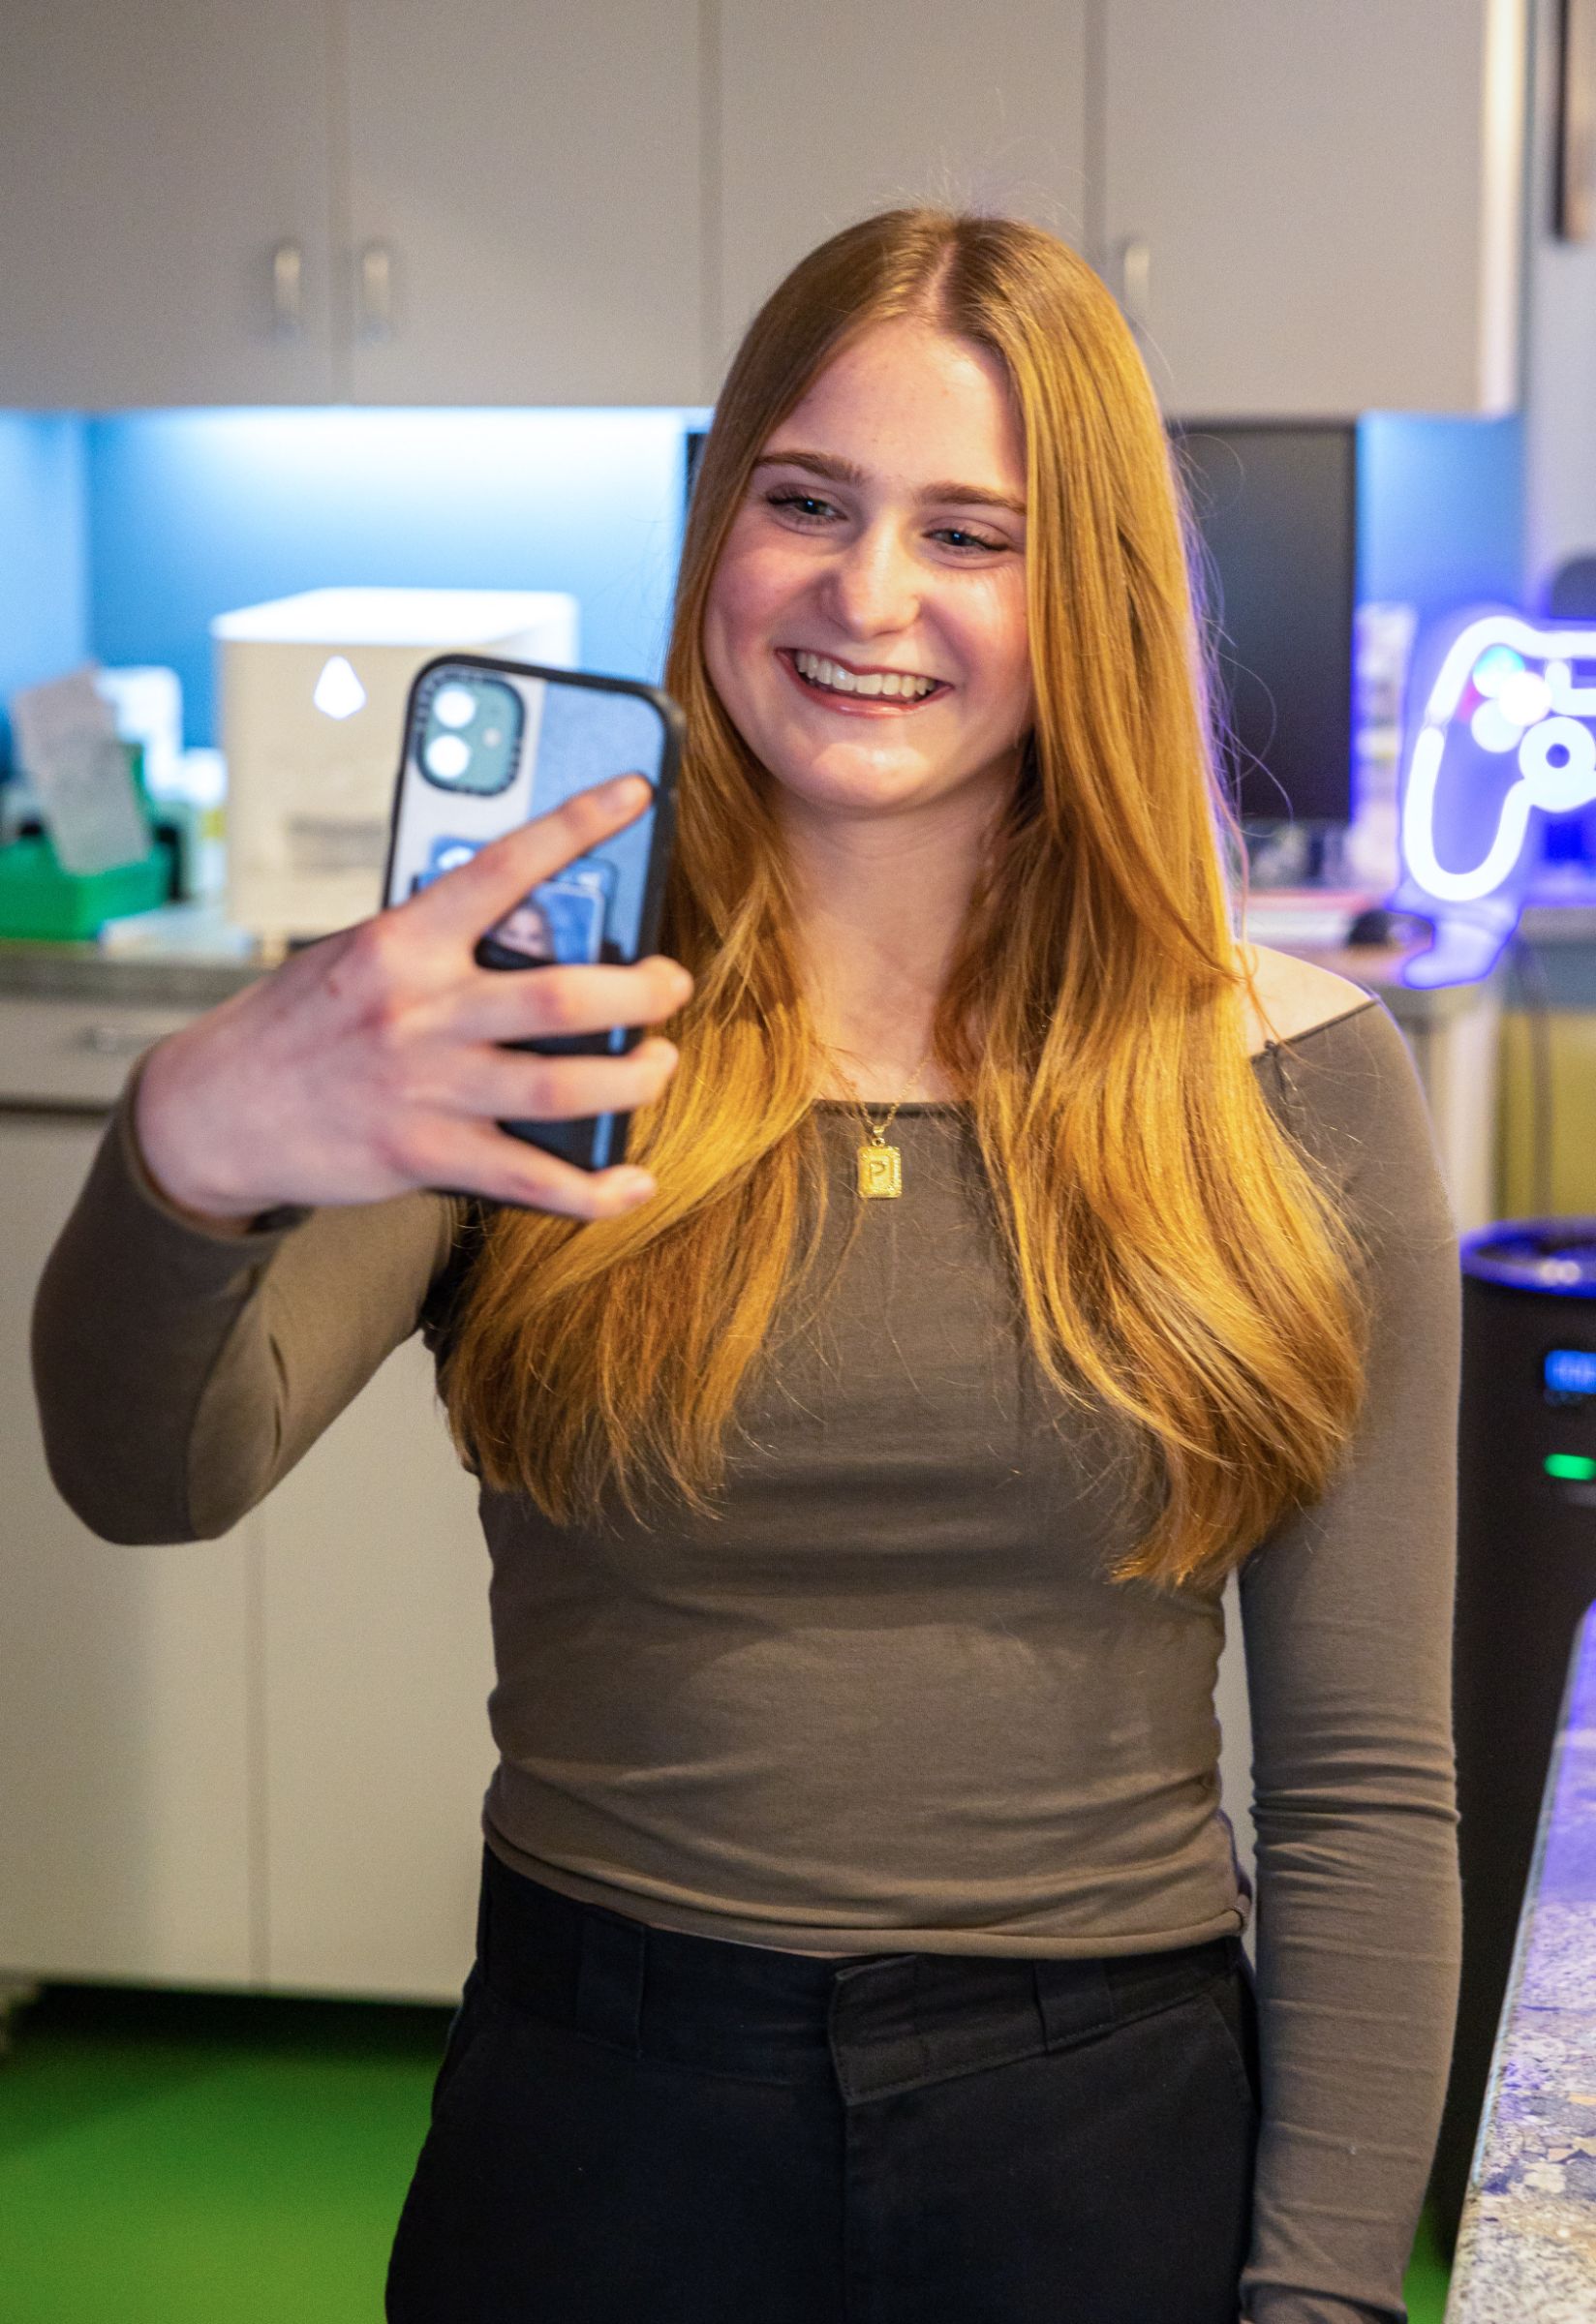 teen patient smiling and taking a selfie photo